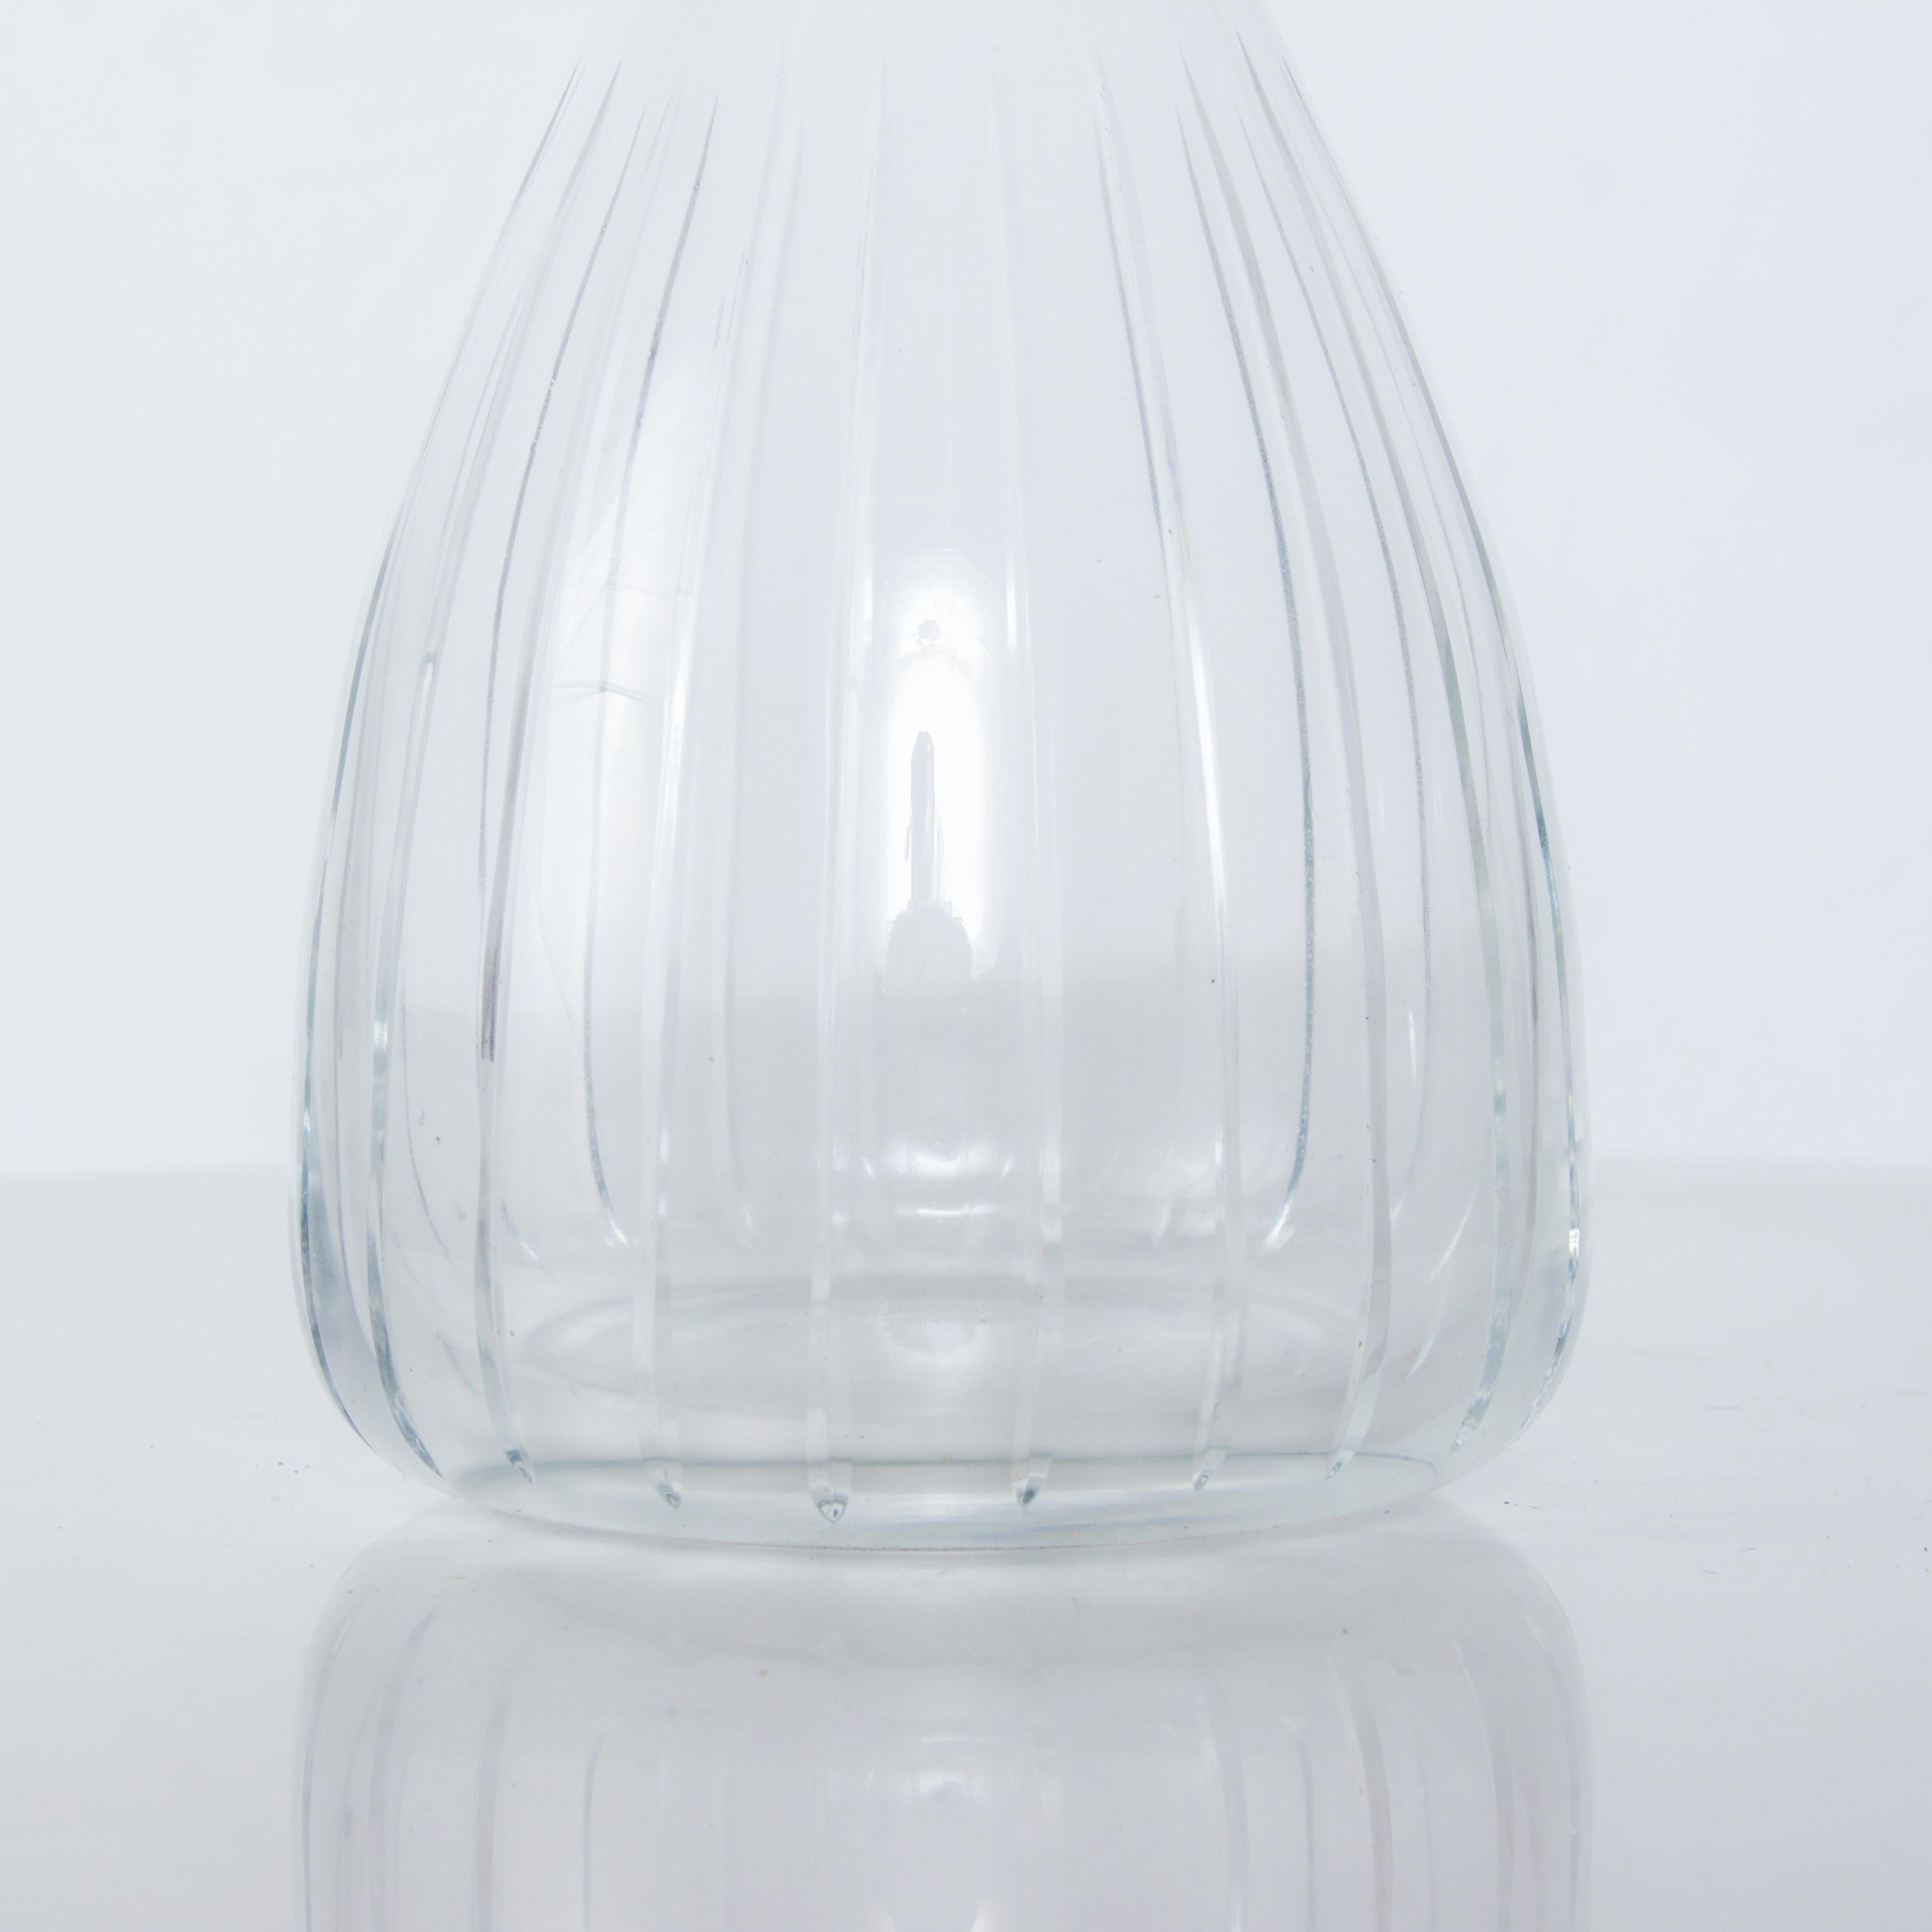 1950s shapely blown glass carafe ribbed Iittala bird design in the style of Timo Sarpaneva 
Sculptural carafe pitcher decanter wine water juice drink easy pour
Measures:10.5